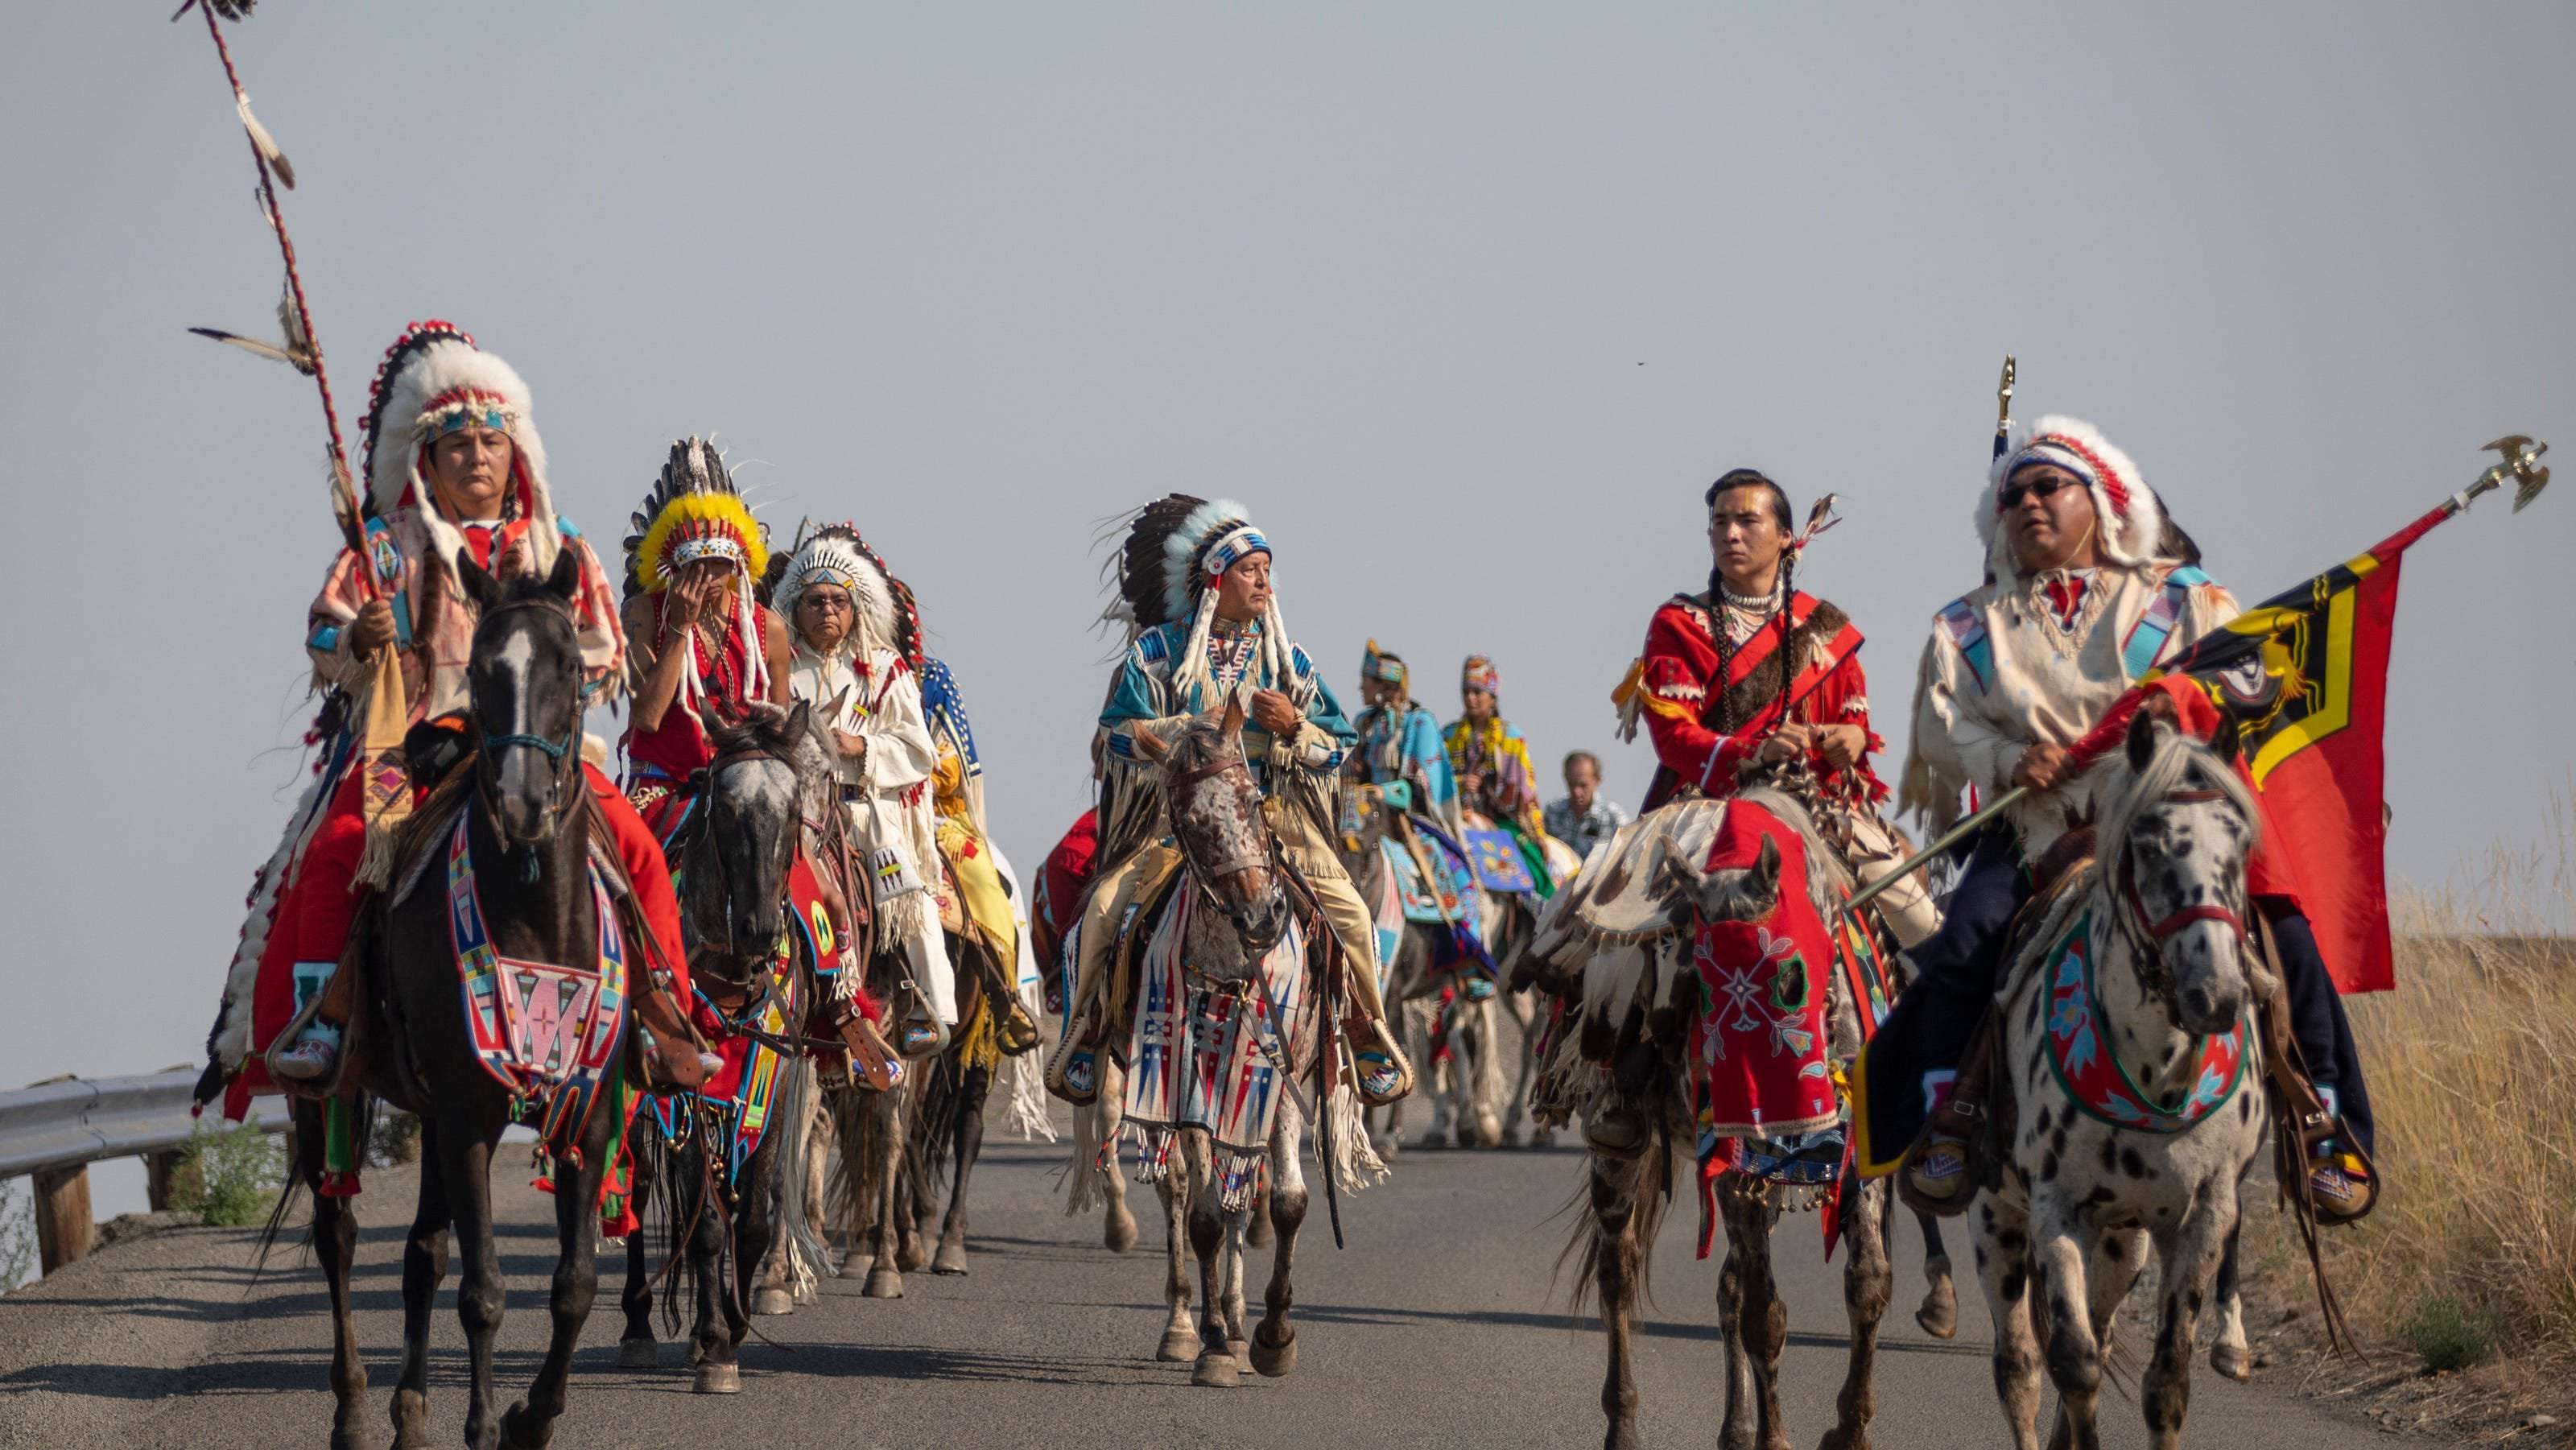 image for 'Homecoming': 100 years after forceful removal, Nez Perce people celebrate reclaimed land